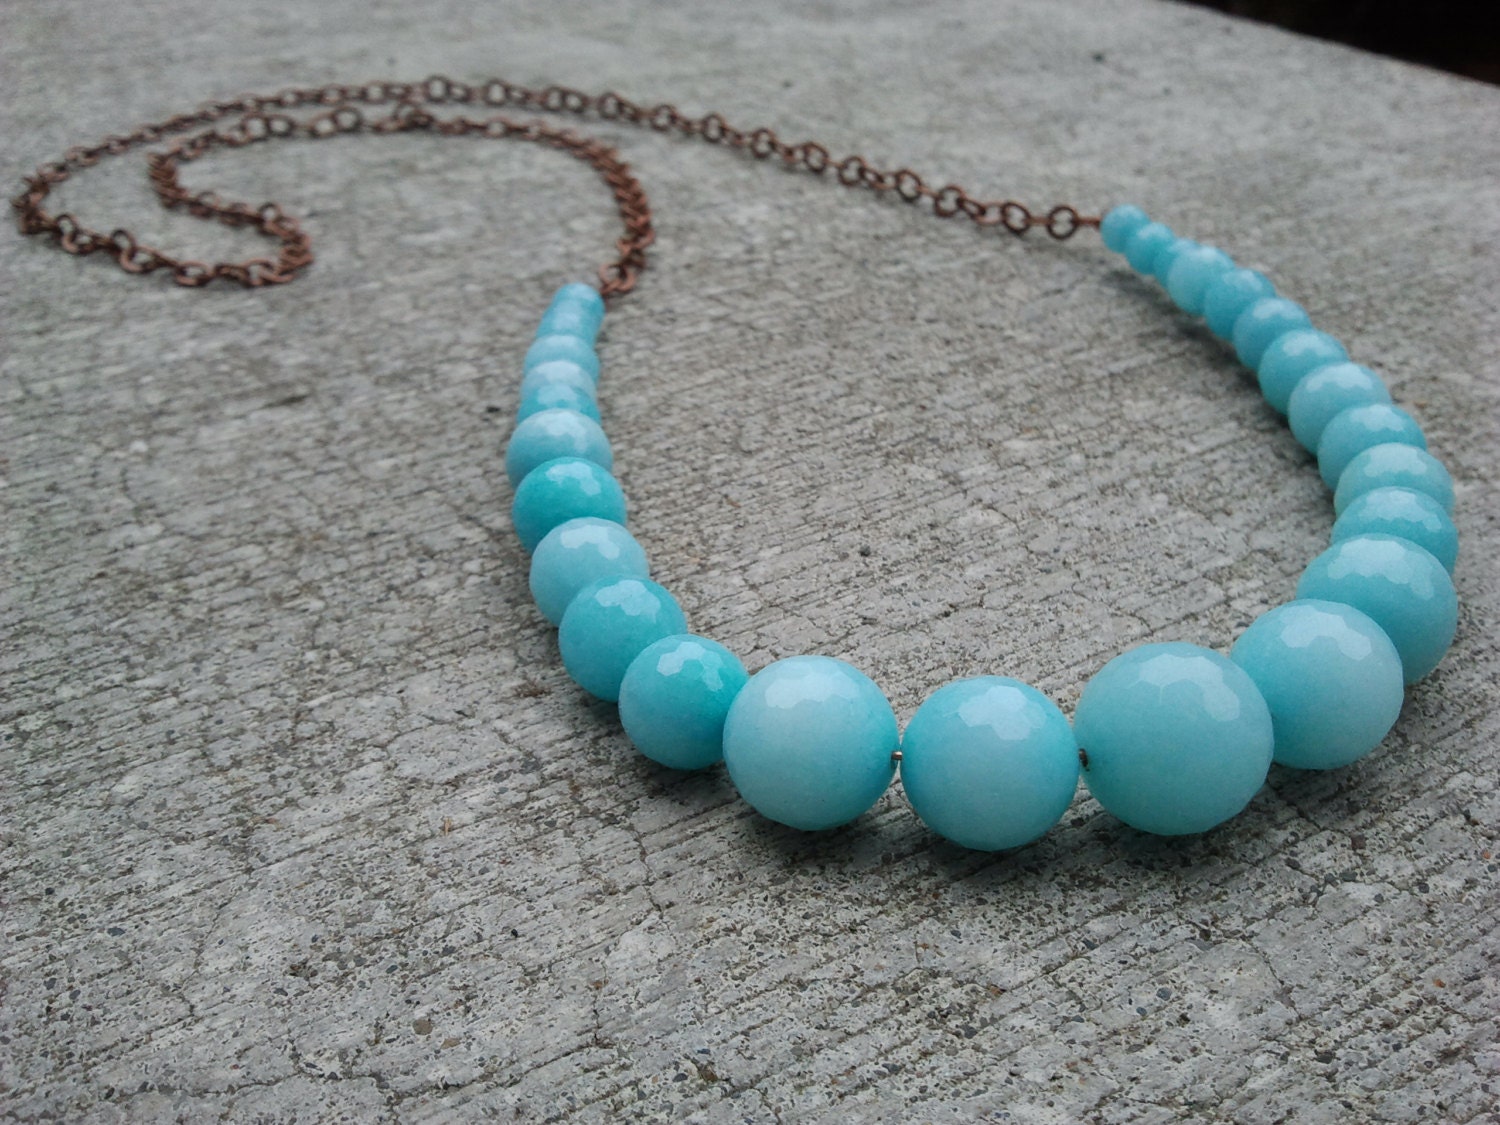 Robins Egg Blue Beaded Necklace with Copper Chain